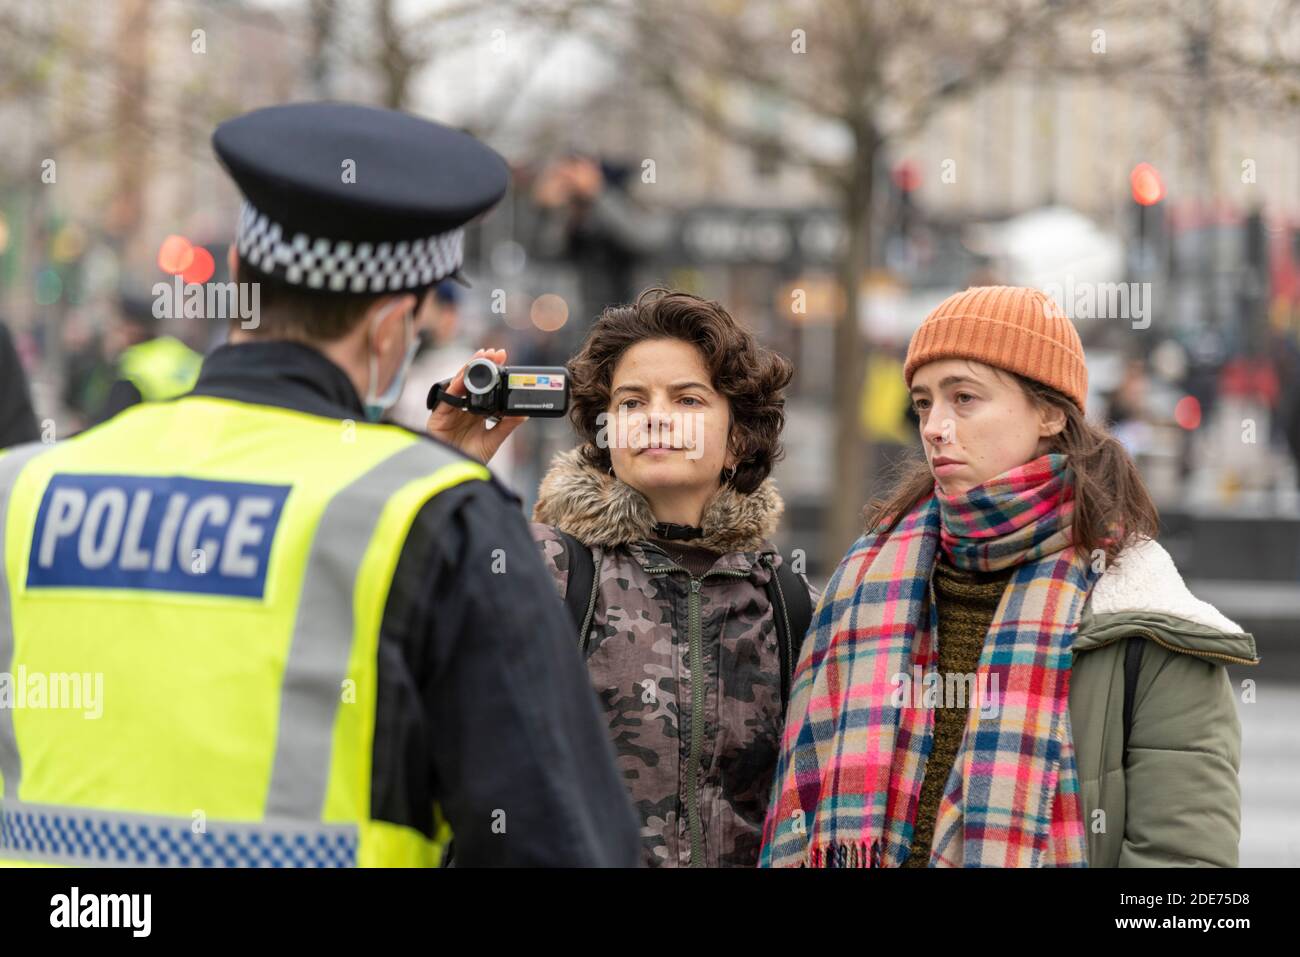 White Caucasian females filming a police officer at a COVID 19 Coronavirus anti lockdown protest march in London, UK. Using video camera Stock Photo